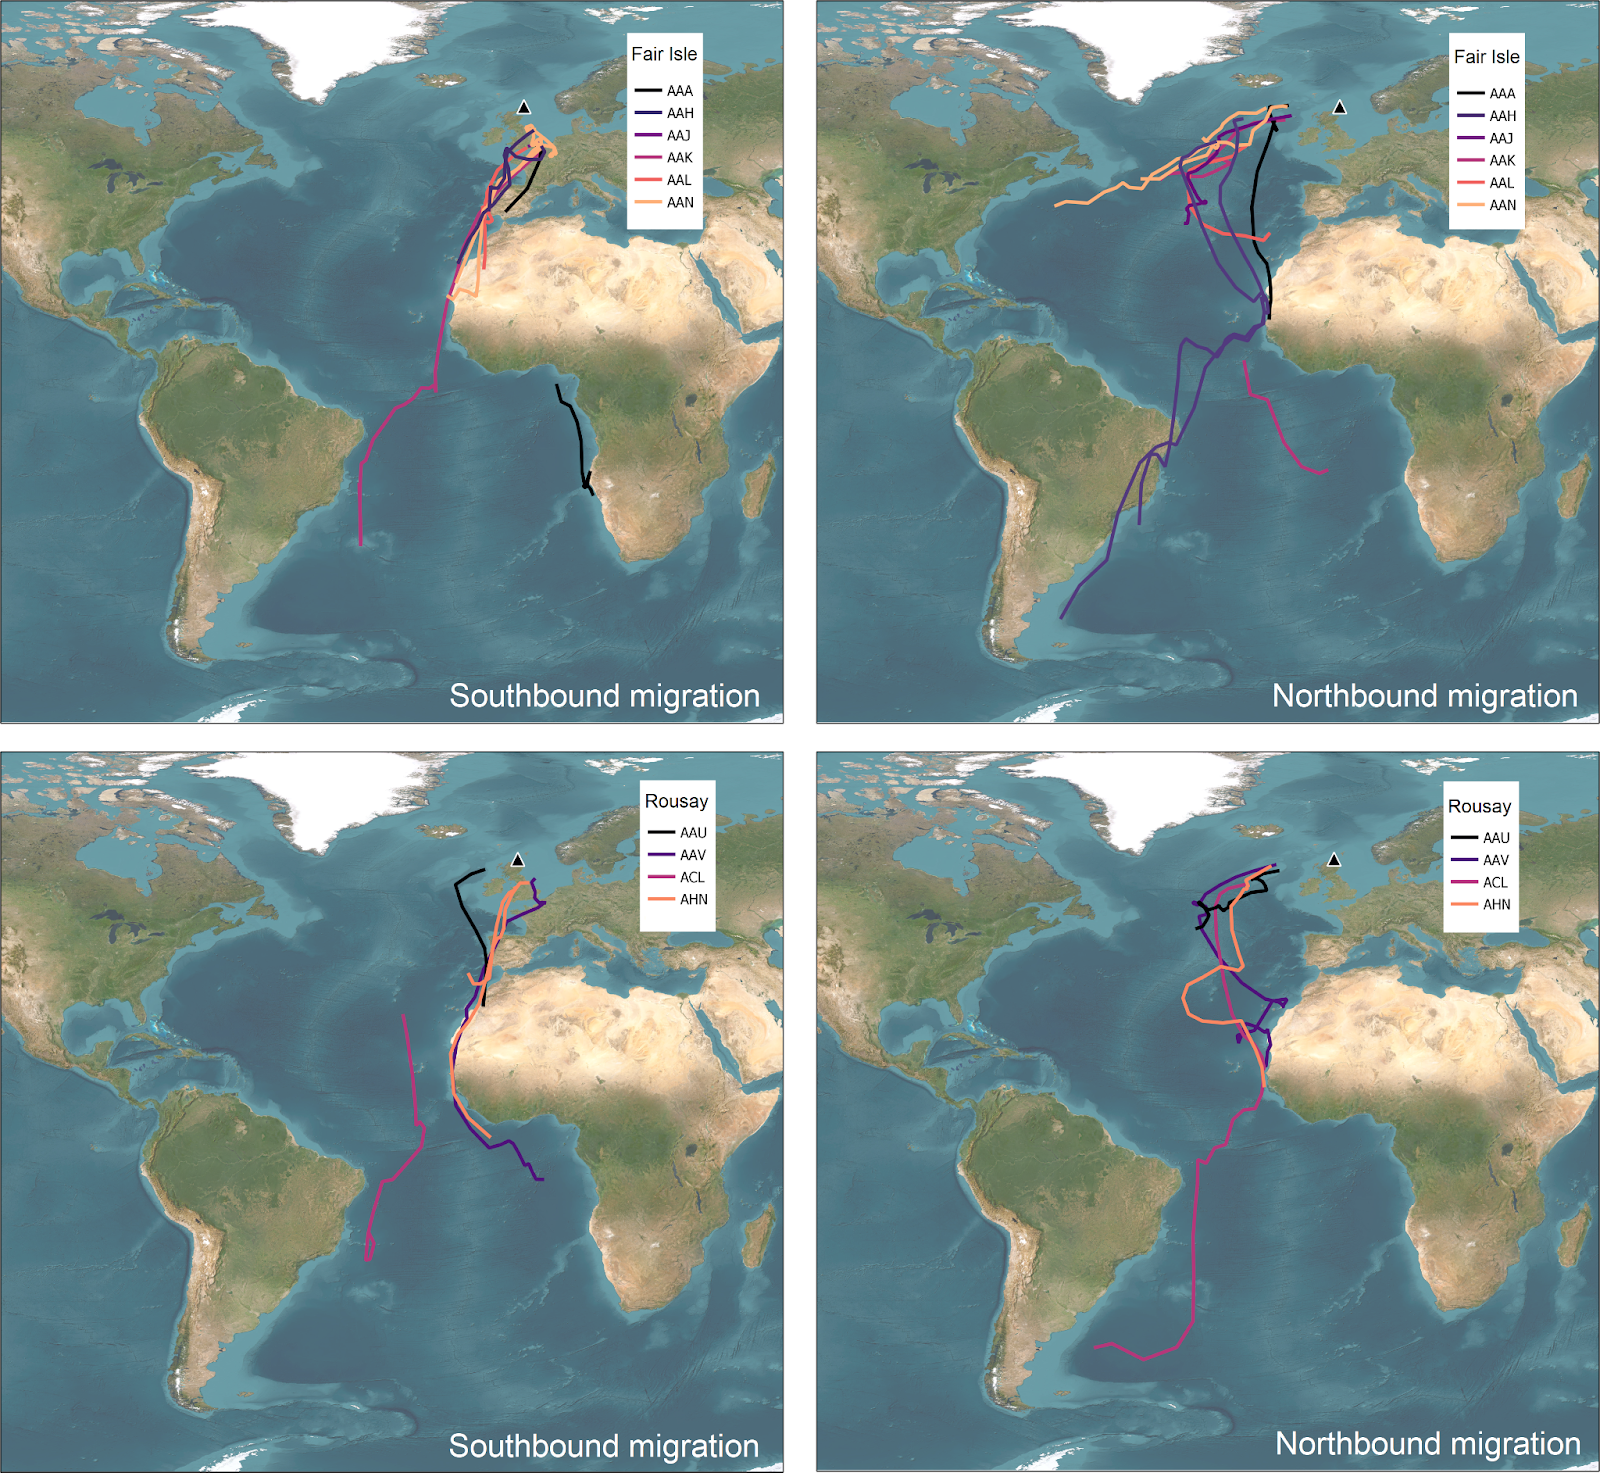 Four maps of the Arctic Skuas' migratory routes, showing the southward and northward journeys. On the southward journey, most birds moved through the North Sea and the English Channel then along the Iberian Peninsula and off West Africa., On the northward journey, individuals that wintered around the Patagonian Shelf and Benguela Current returned north via West Africa. All the birds, including those wintering in the Canary Current, headed into the mid-Atlantic before returning to Scotland.